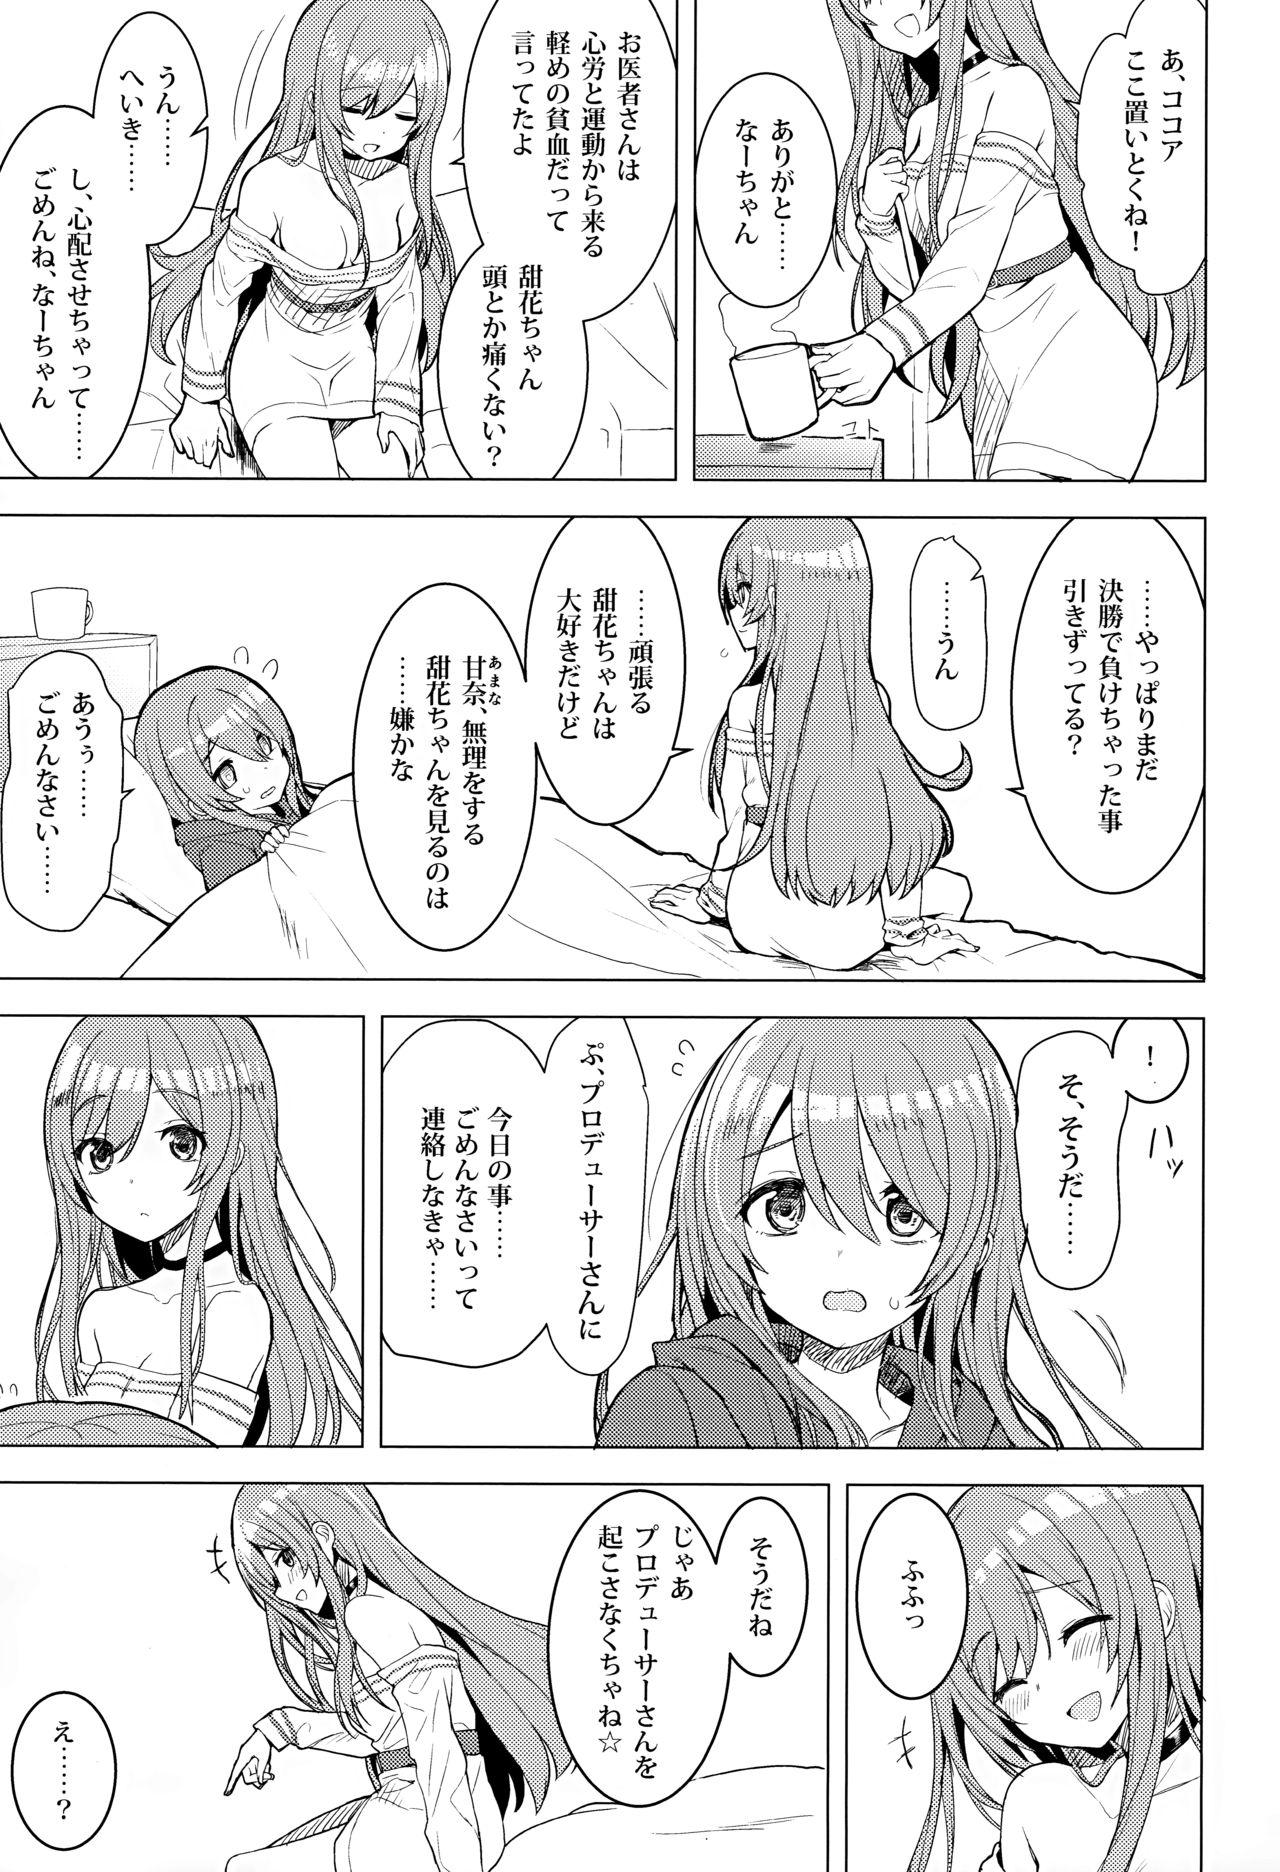 Transsexual Amahana - The idolmaster Pounded - Page 4